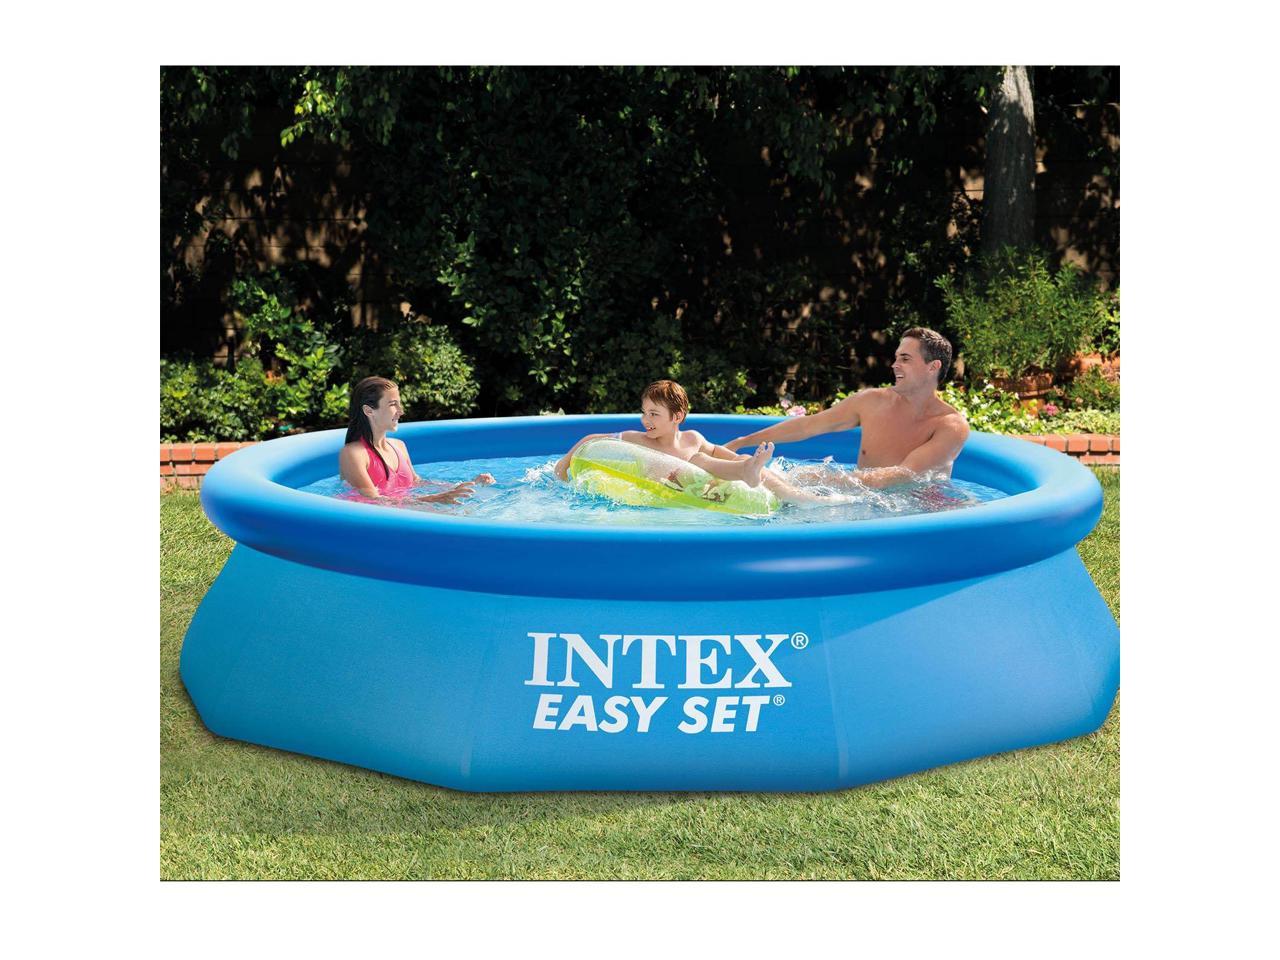 How To Drain Water From Intex Easy Set Above Ground Pool